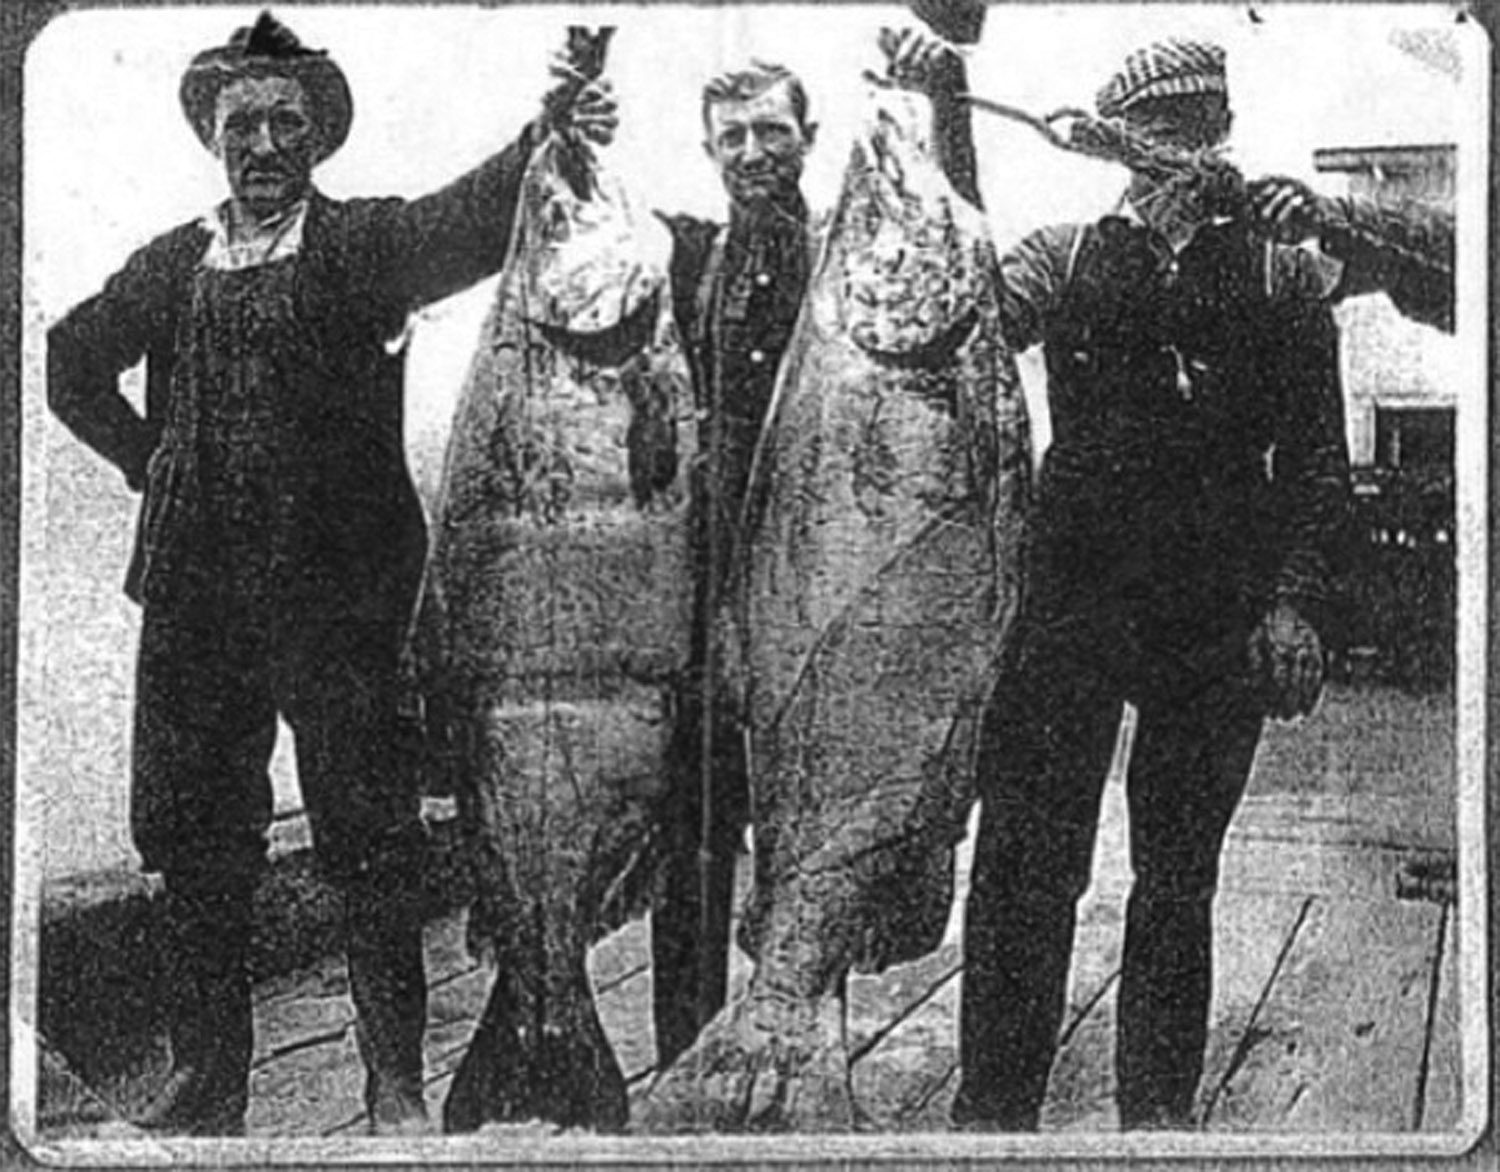 This undated photograph shows two unidentified fishermen in Astoria